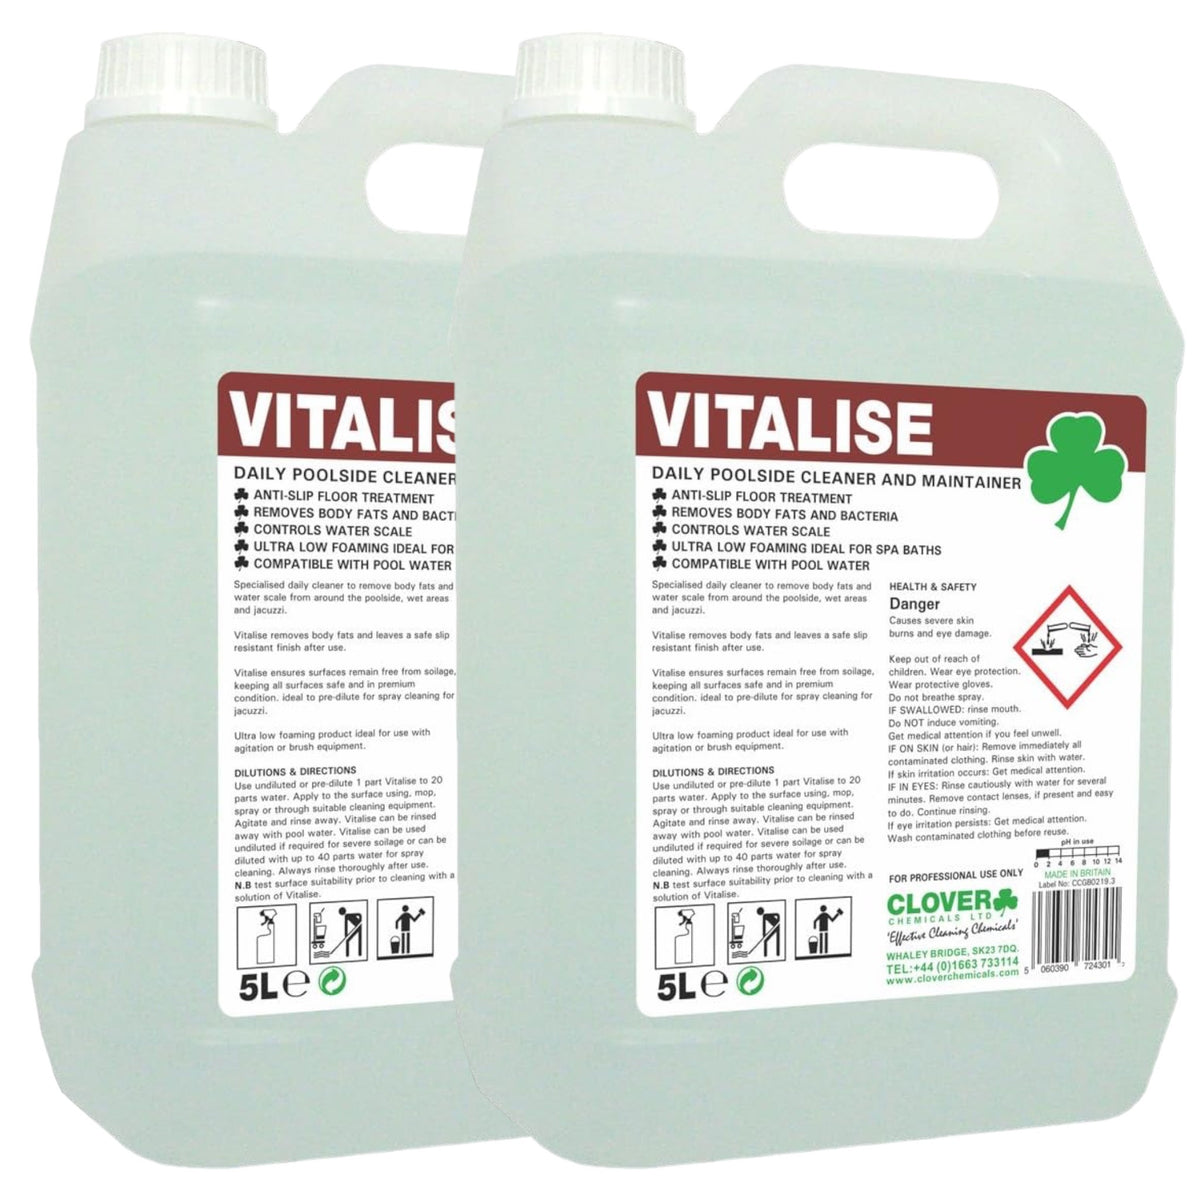 Clover Chemicals Vitalise Poolside Cleaner and Maintainer 10 Litre